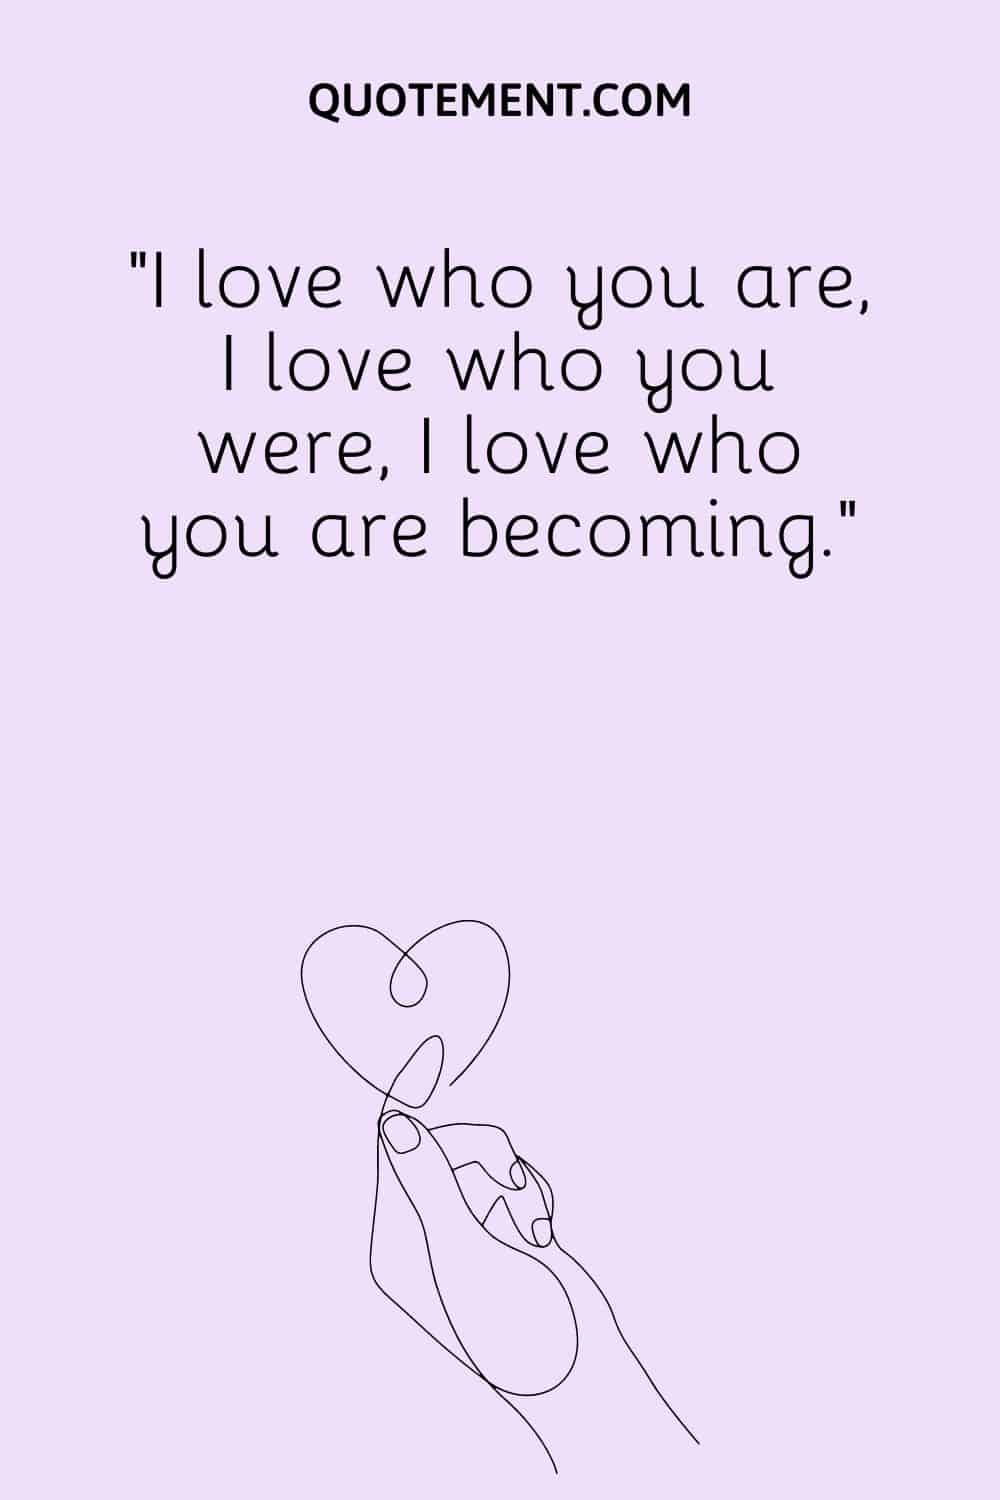 I love who you are, I love who you were, I love who you are becoming